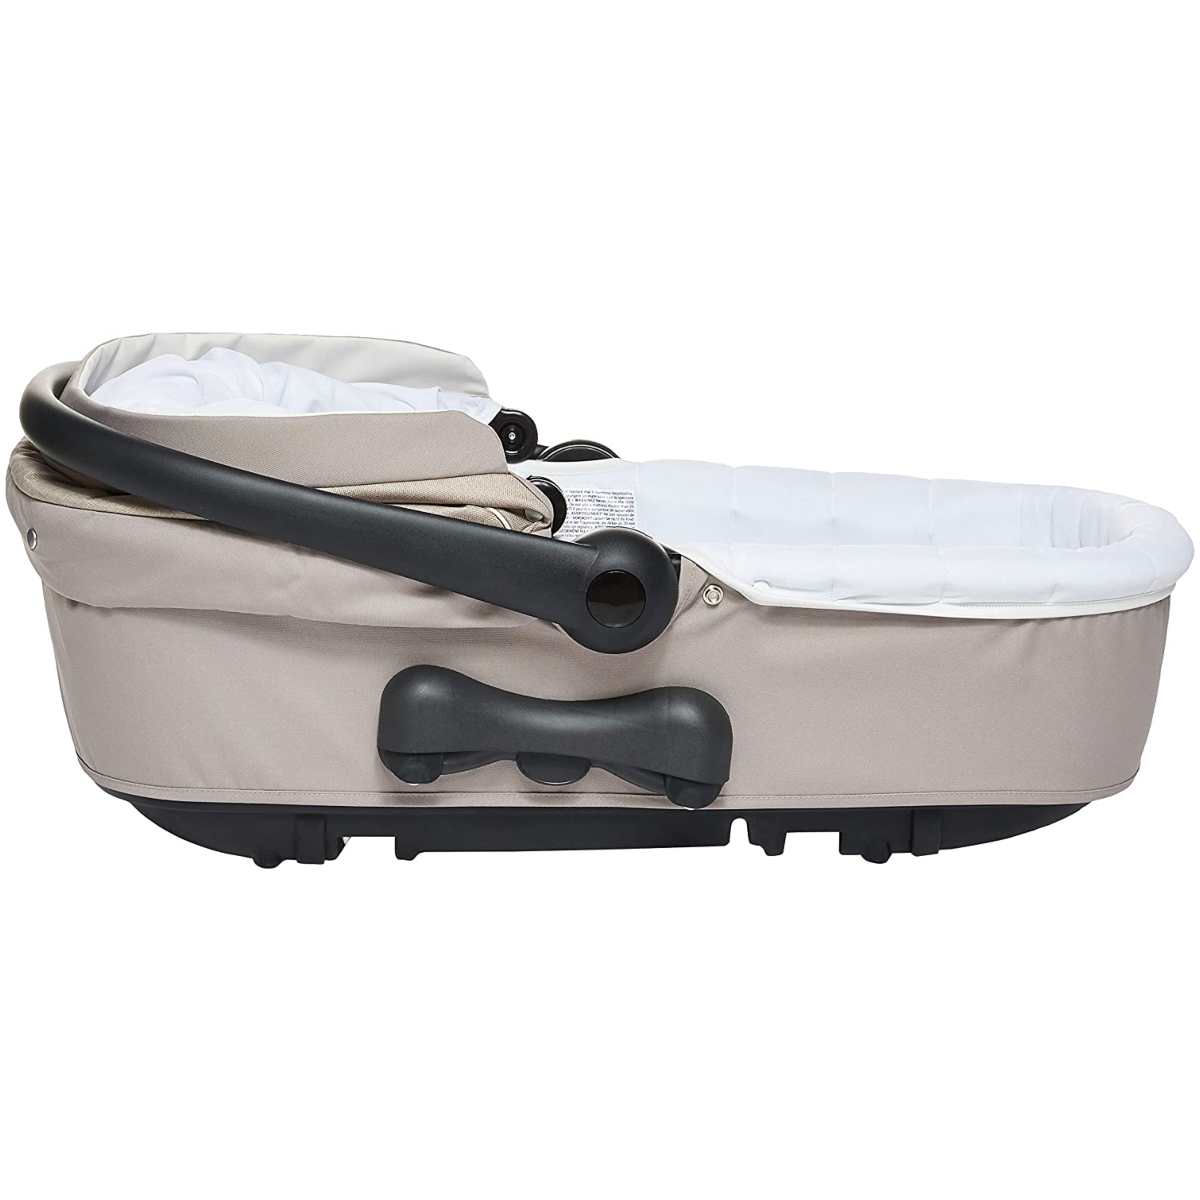 Cam - Coccola Baby infant Carrycot travel full body support, Beside sleeper, Bassinet, Portable bed, brethable cotton, Pressure protection, outdoor, picnic and travel - Beige